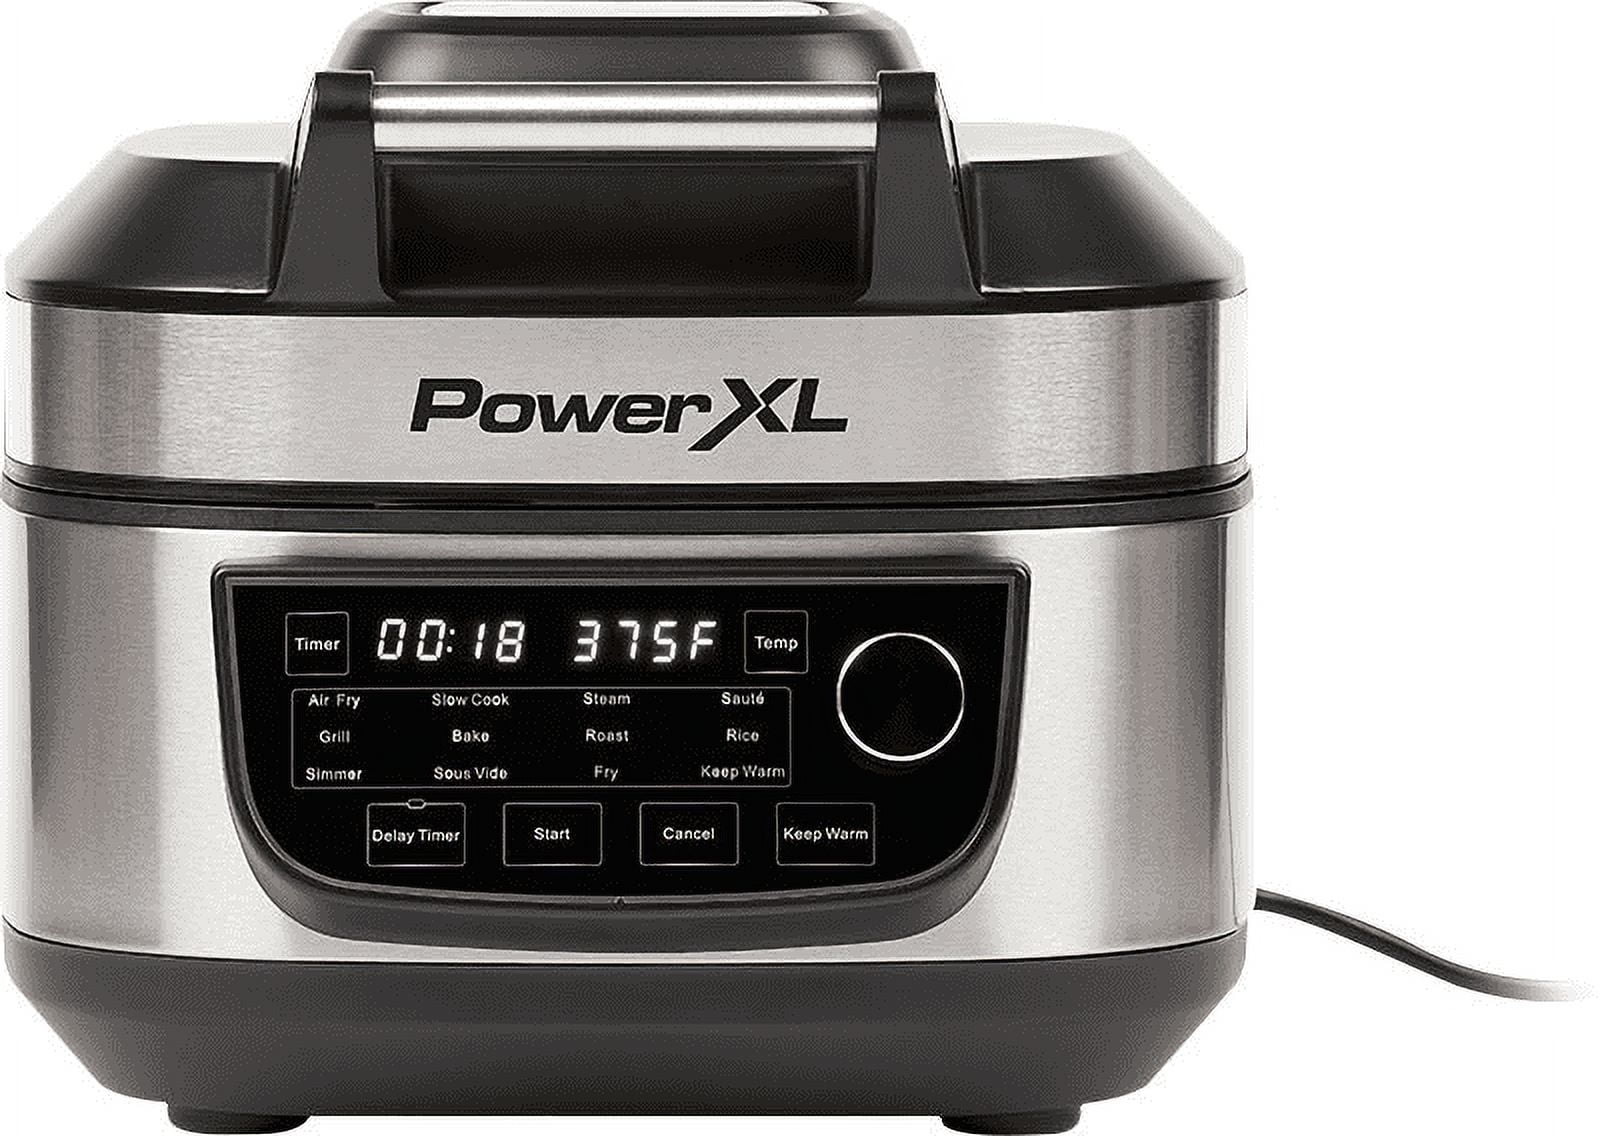 PowerXL Grill Air Fryer Combo 12-in-1 Indoor Grill, Air Fryer, Slow Cooker,  Roast, Bake, 1550-Watts, Stainless Steel Finish